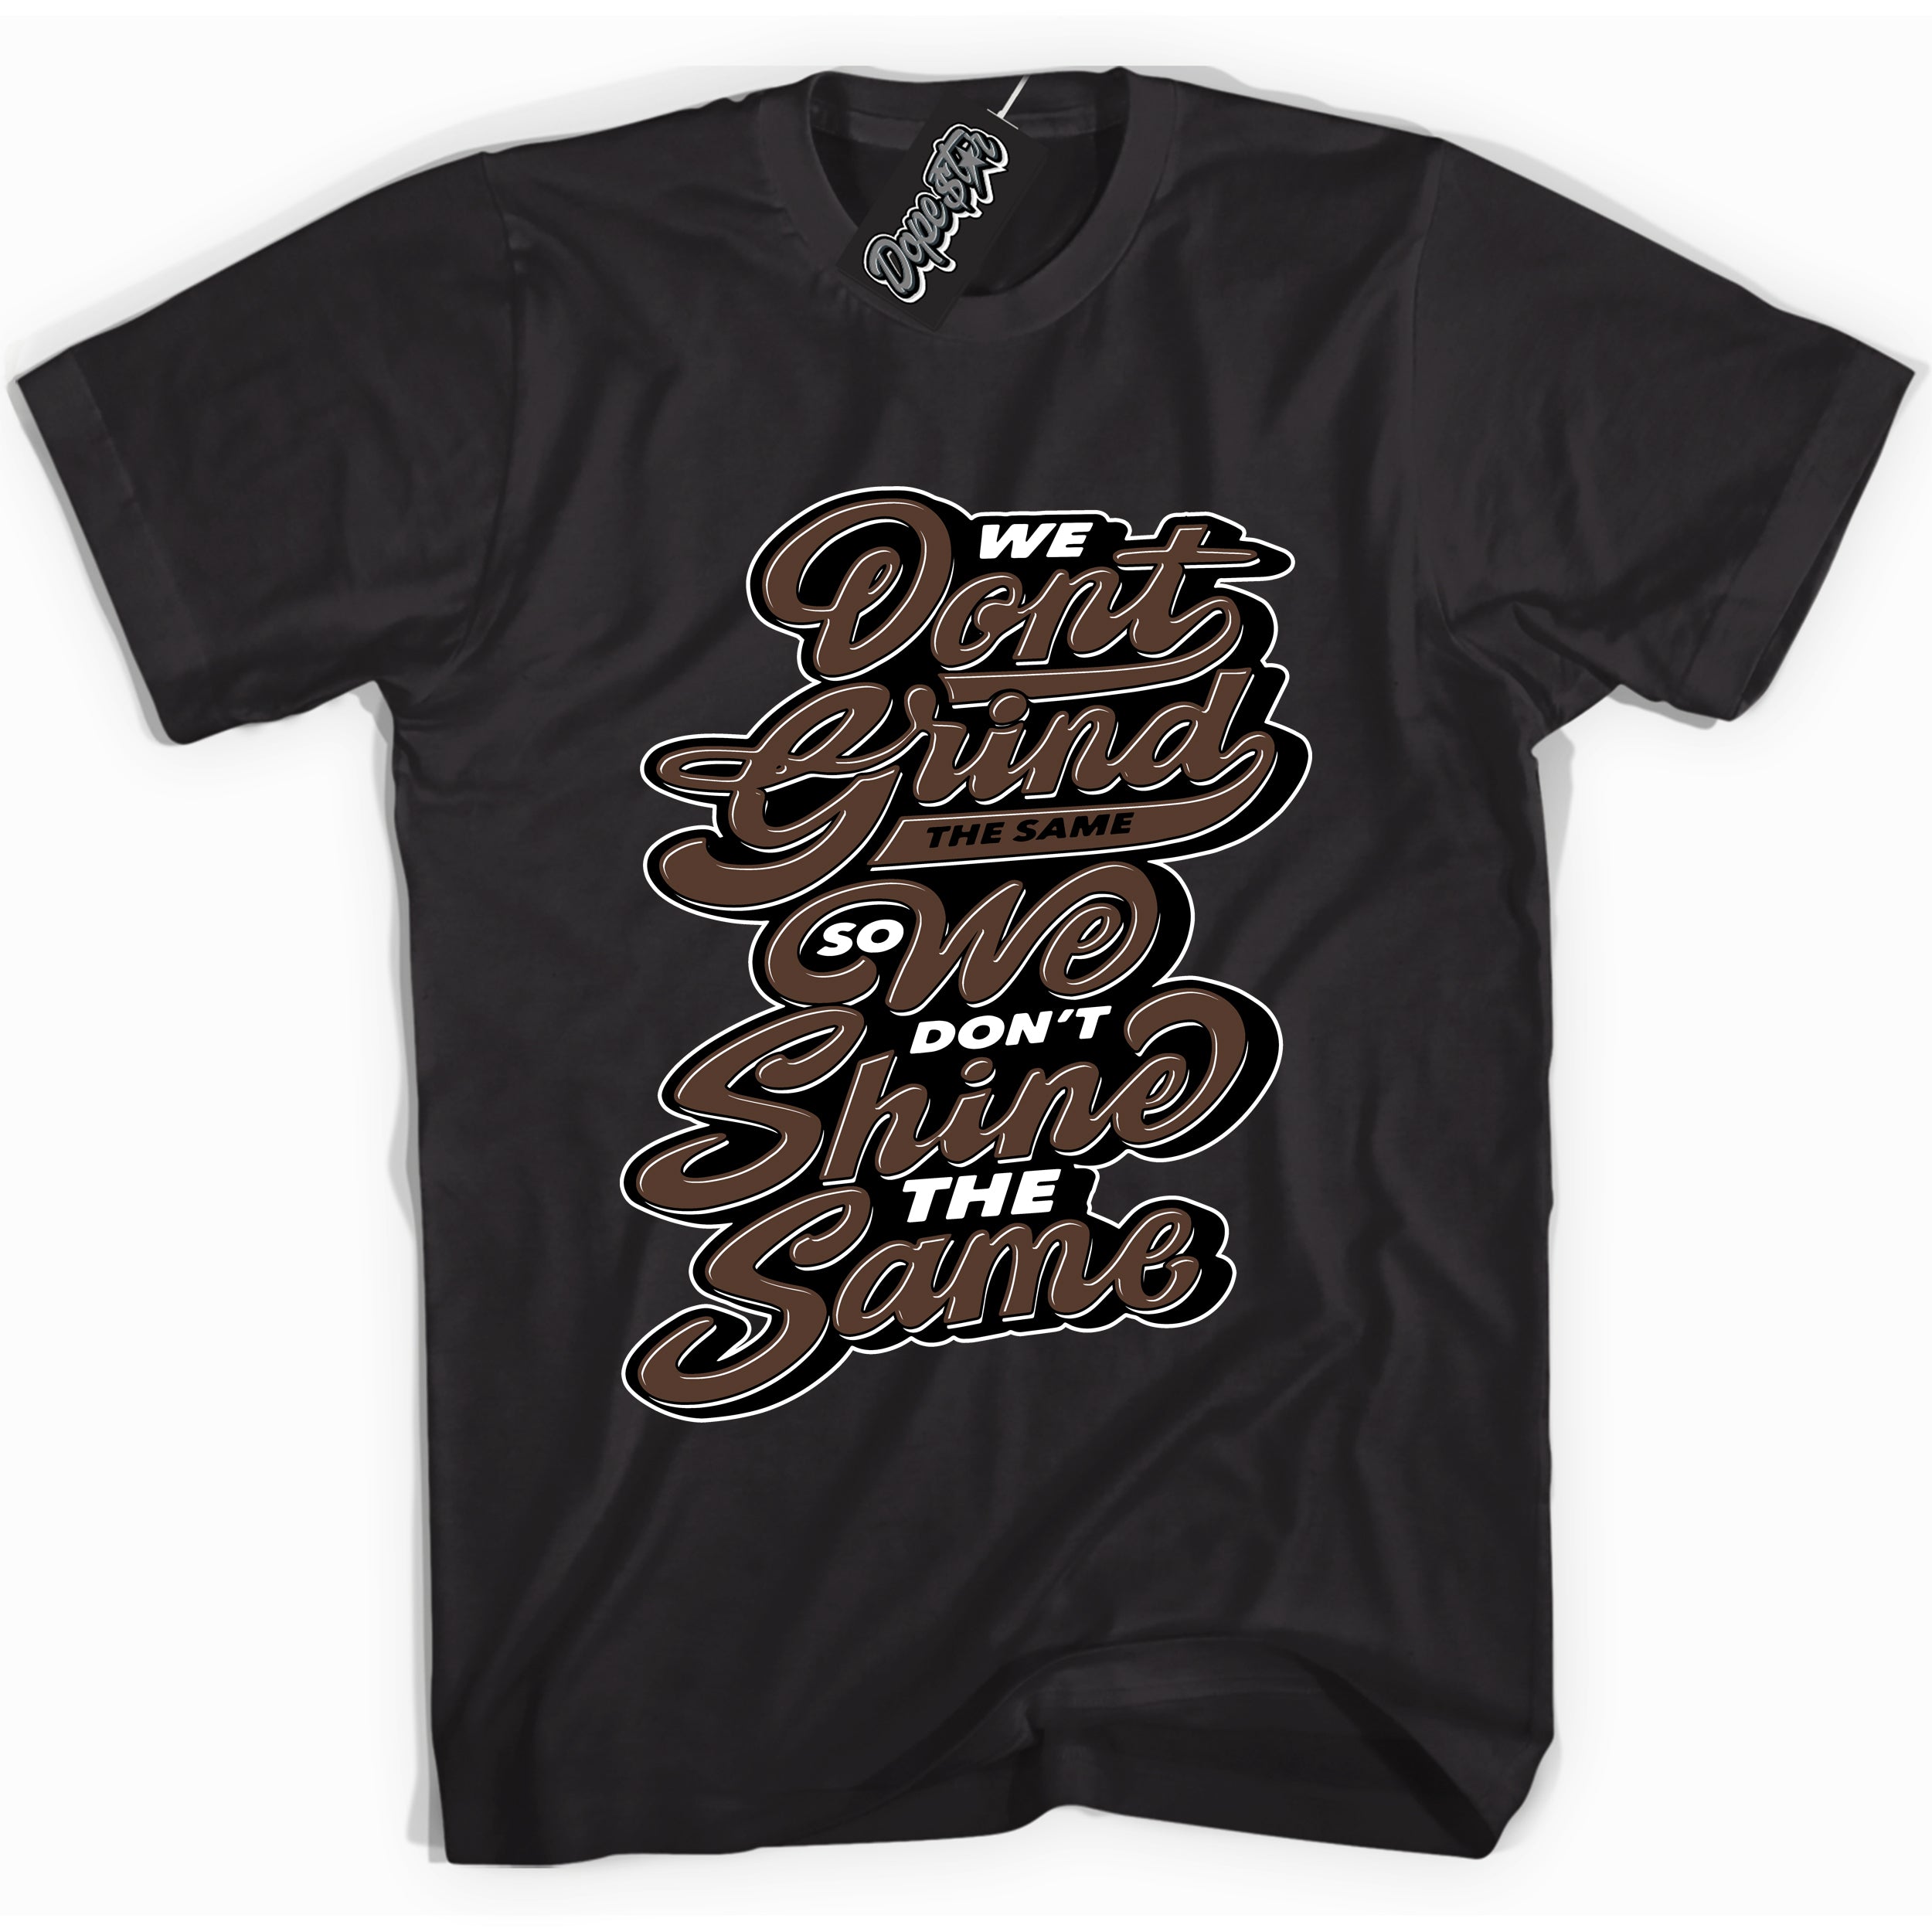 Cool Black graphic tee with “ Grind Shine ” design, that perfectly matches Palomino 1s sneakers 